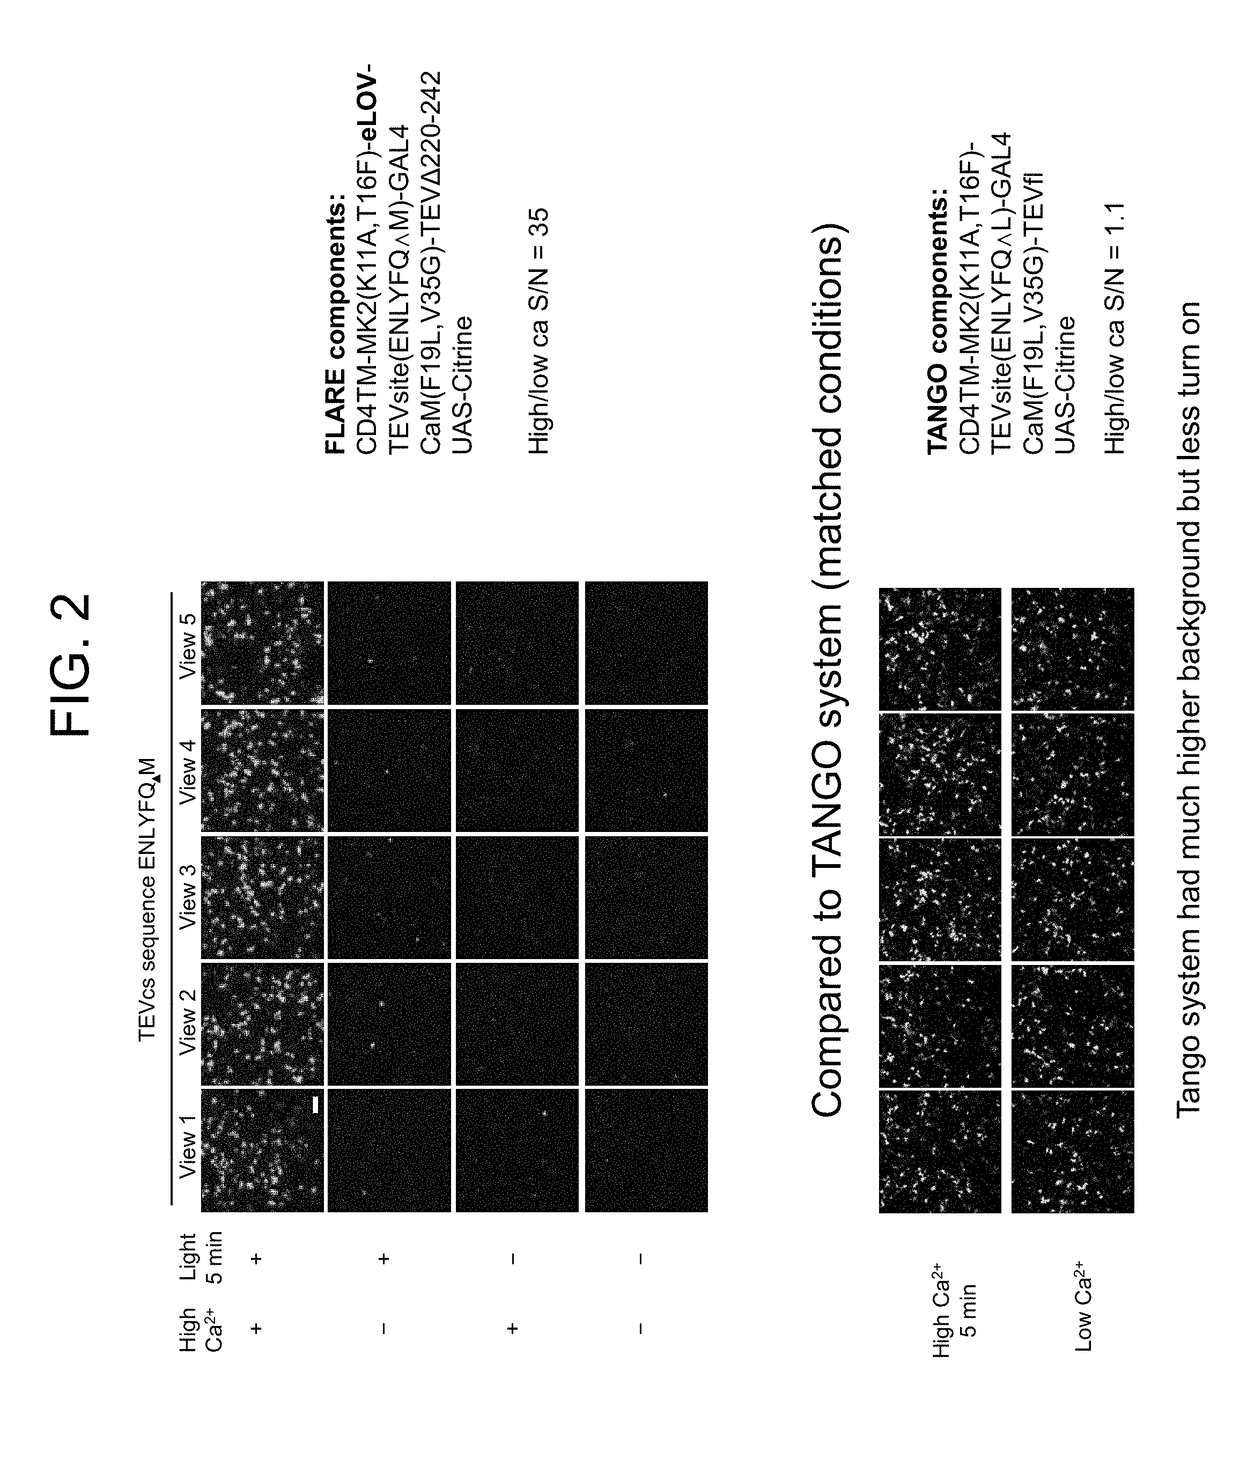 Protein-protein interaction detection systems and methods of use thereof